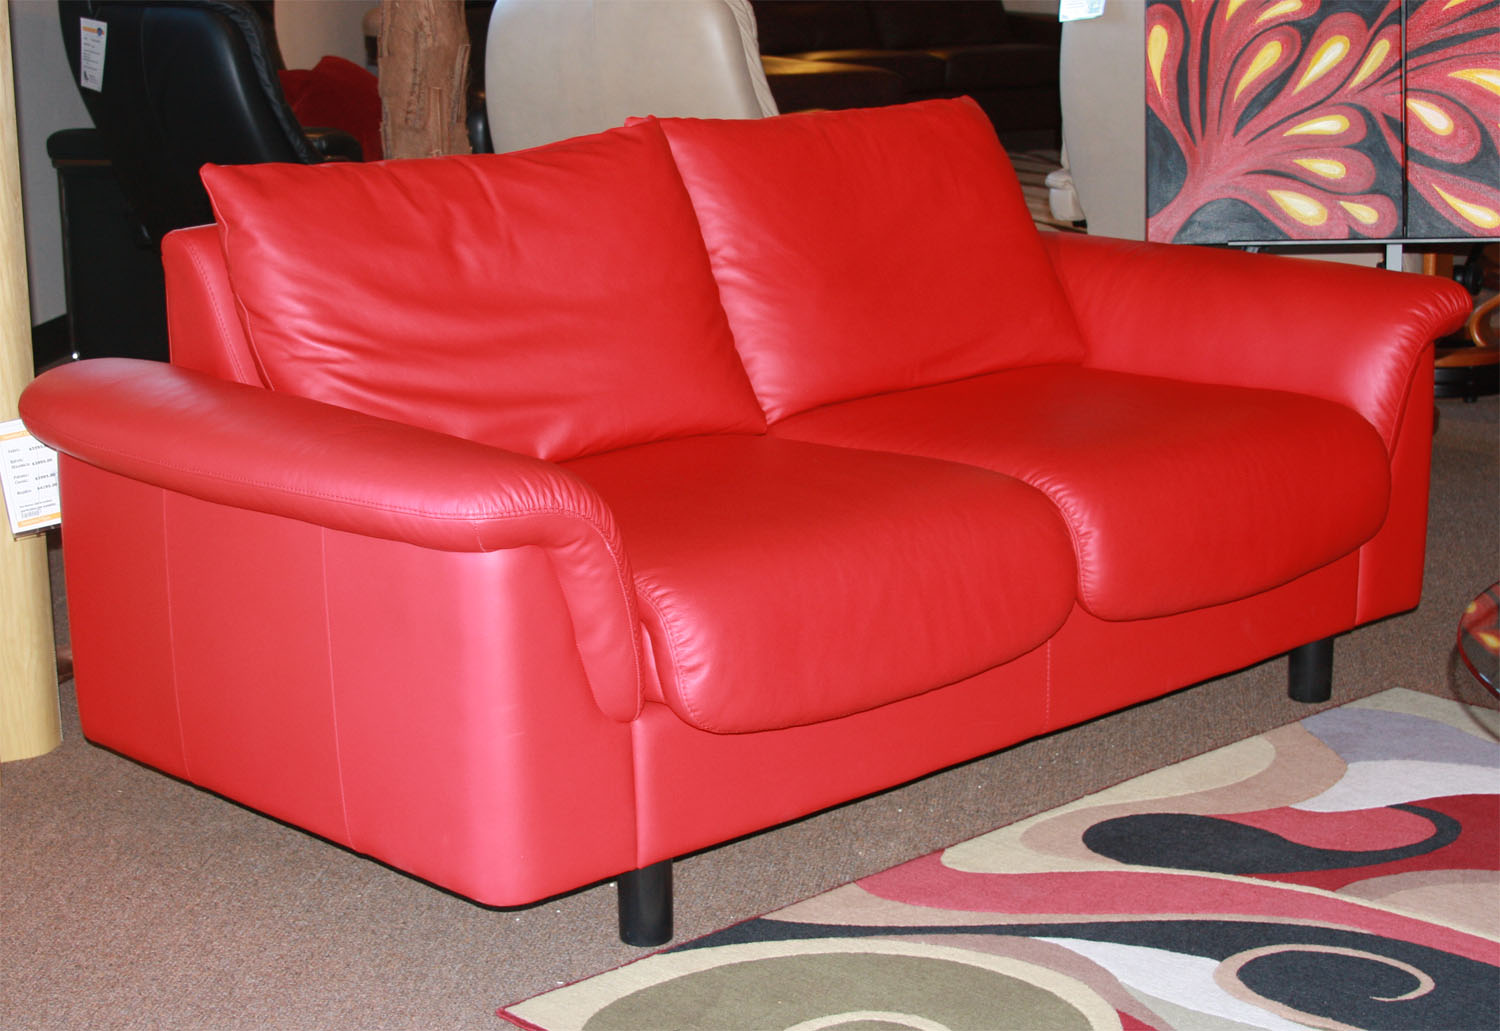 Stressless Paloma Chilli Red 09462 Leather Color Sofa from Ekornes